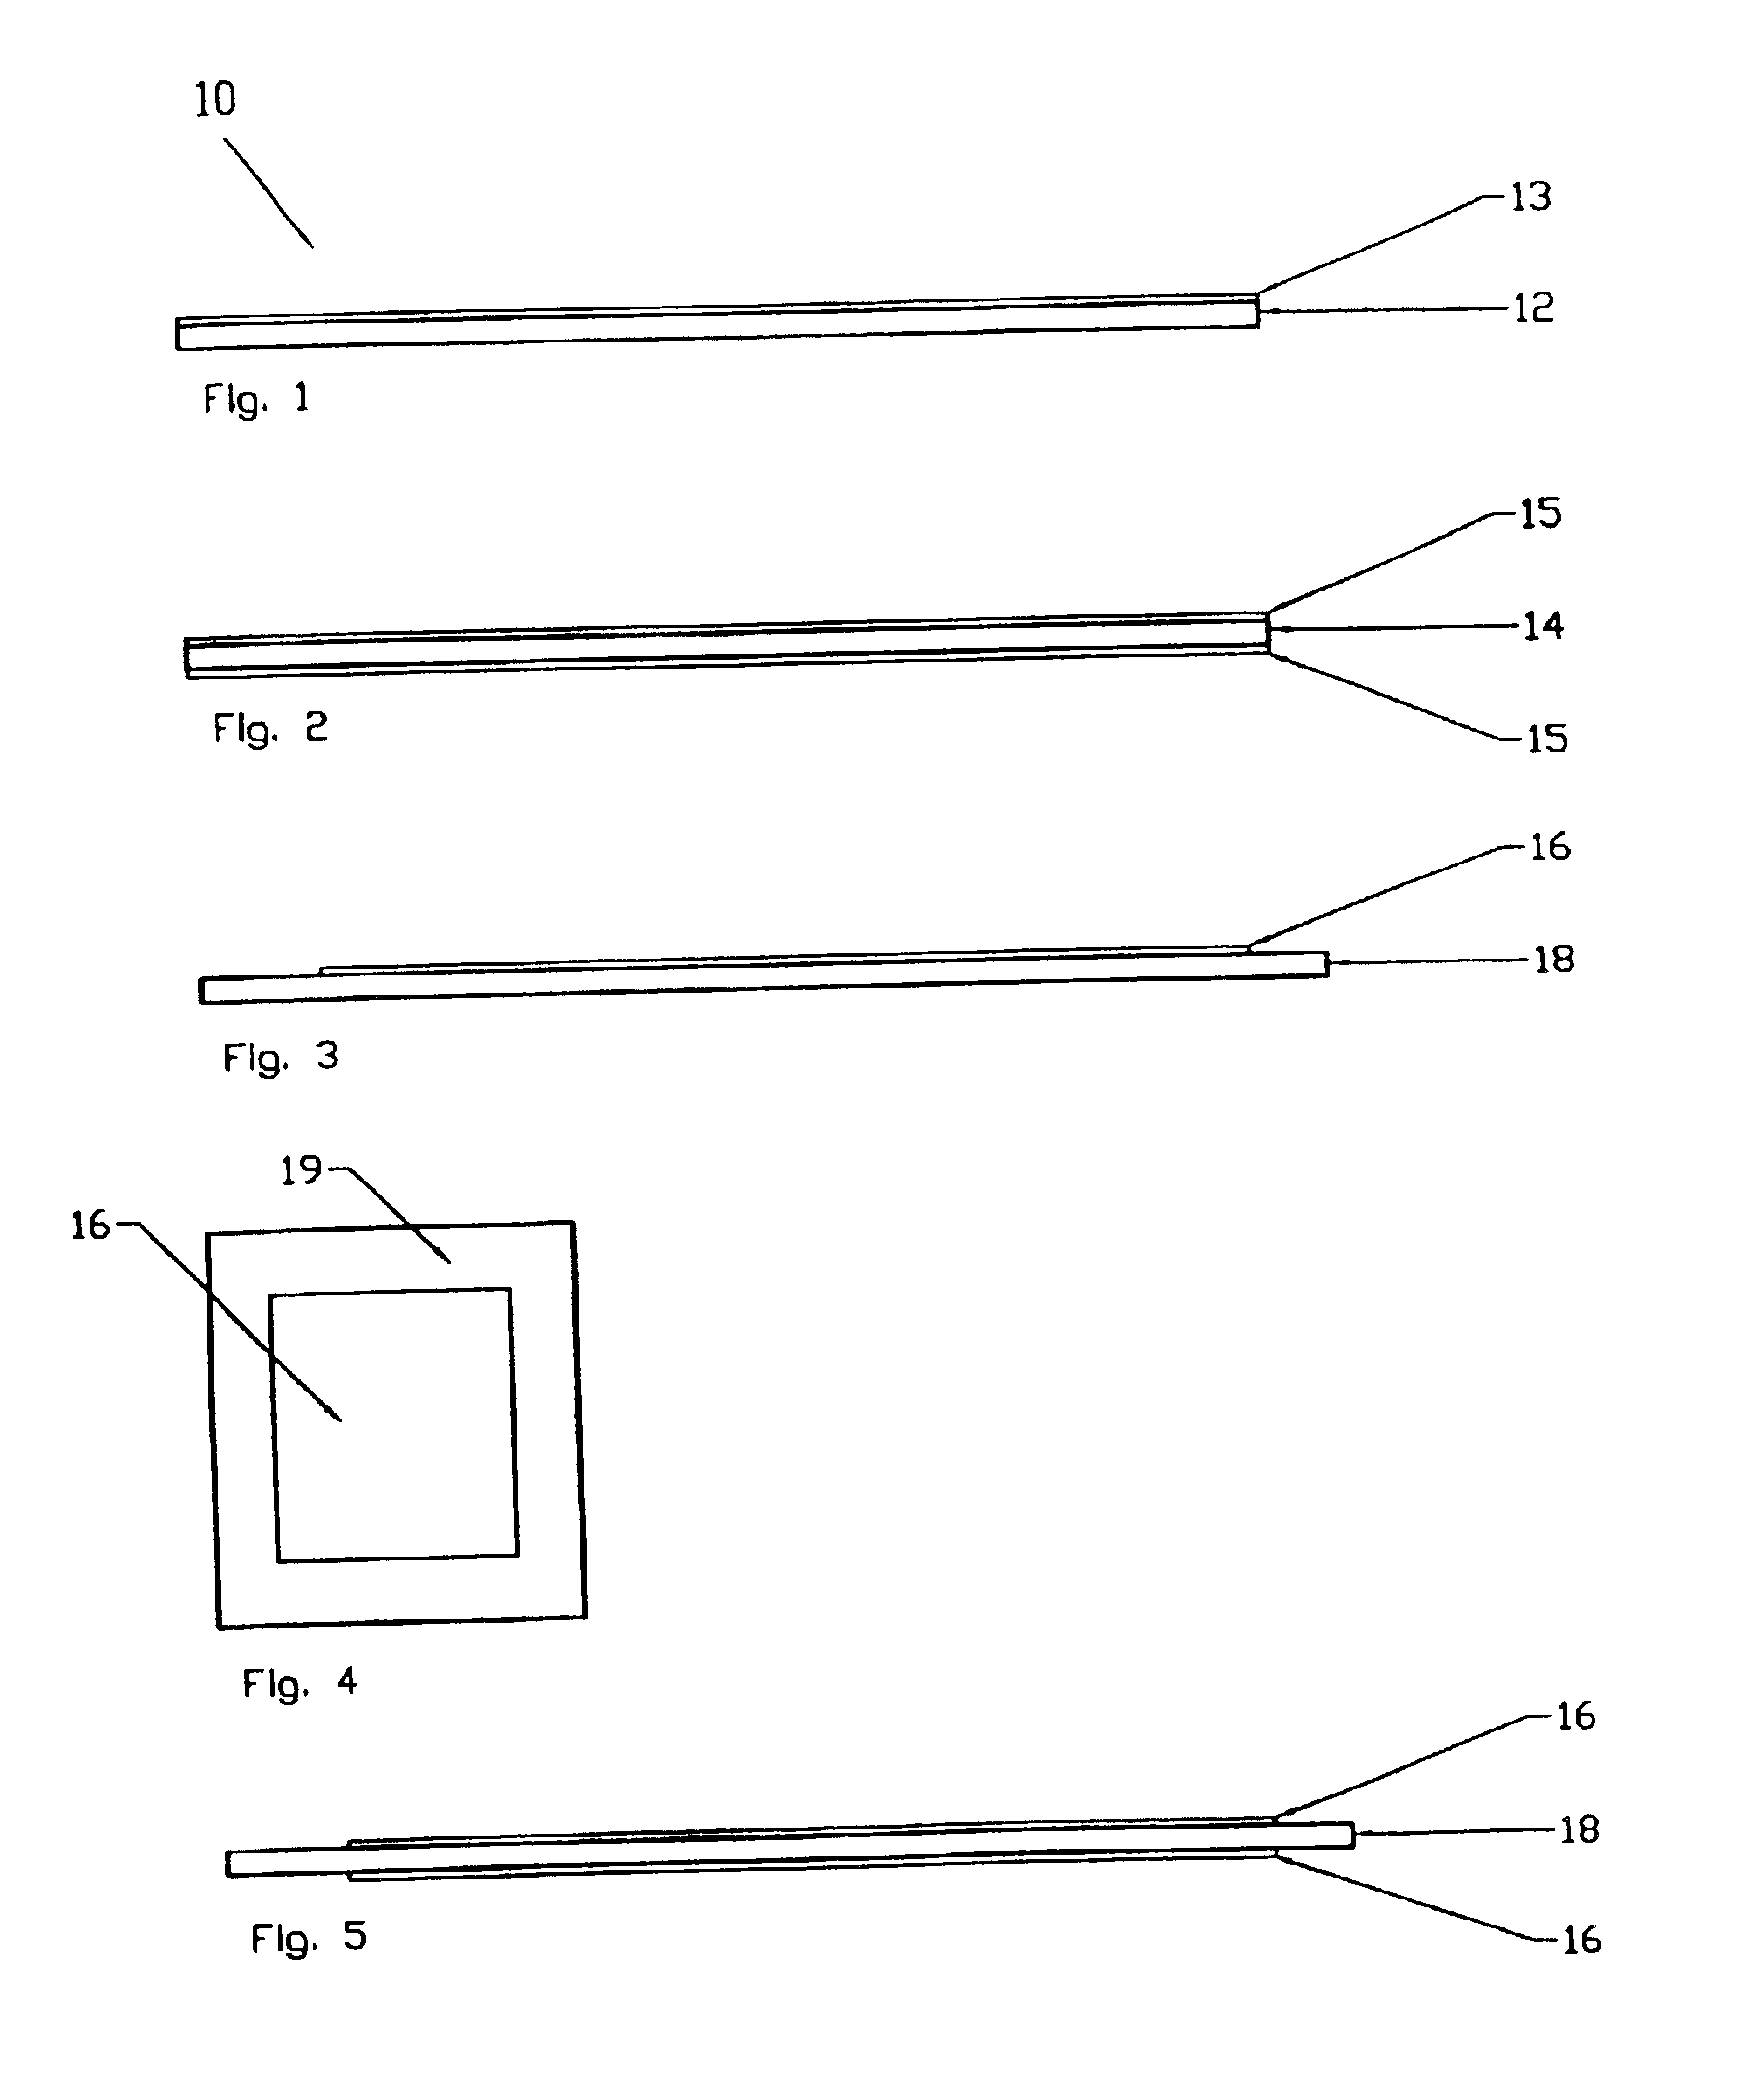 Thermal interface structure for placement between a microelectronic component package and heat sink